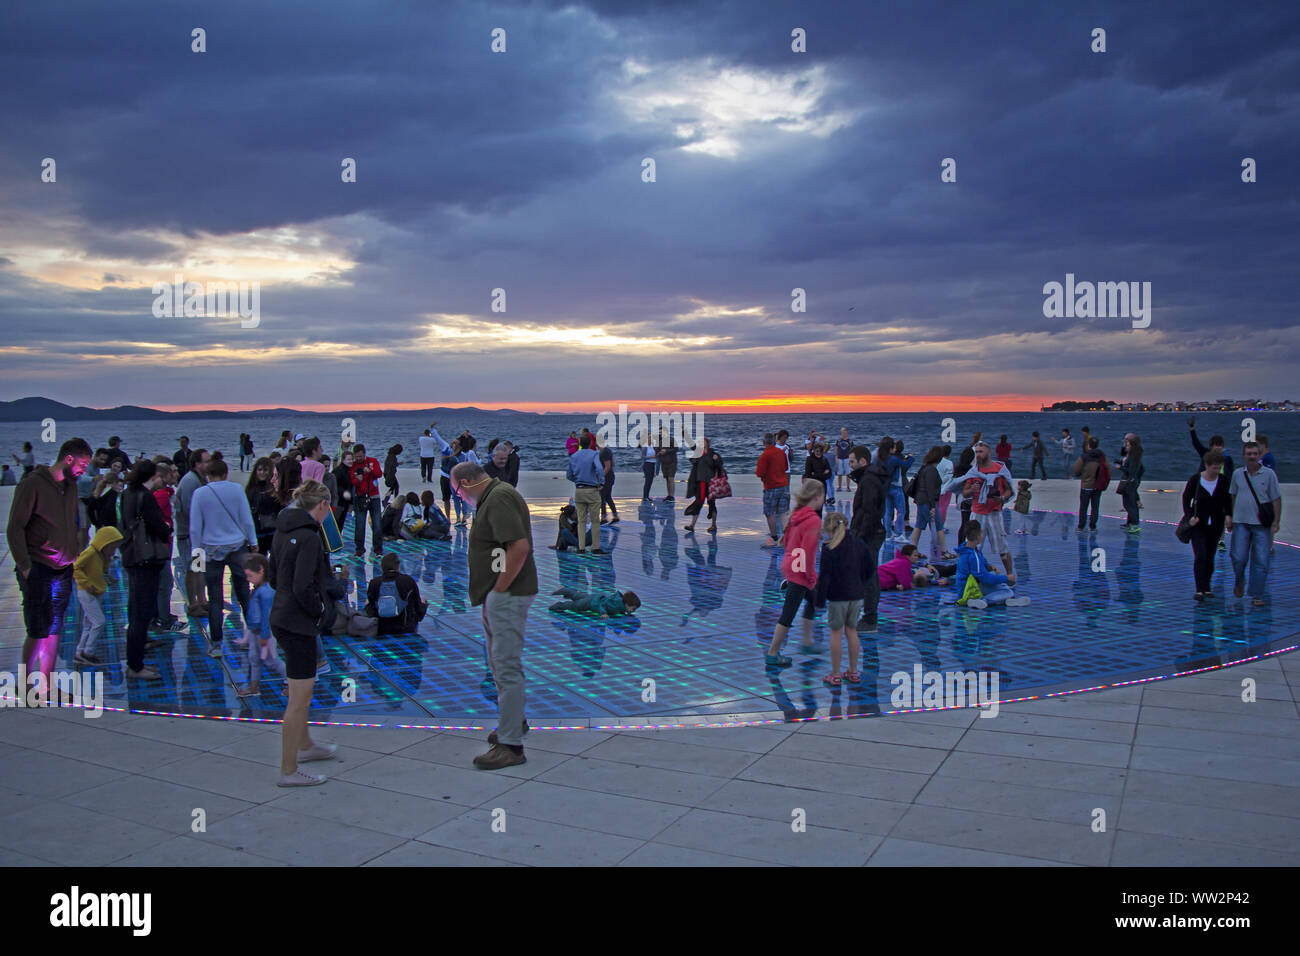 ZADAR/CROATIA - JULY 16: Many people watch sunset over Adriatic sea on famous solar panel urban installation 'Greeting to the Sun', July 16, 2016, in Stock Photo